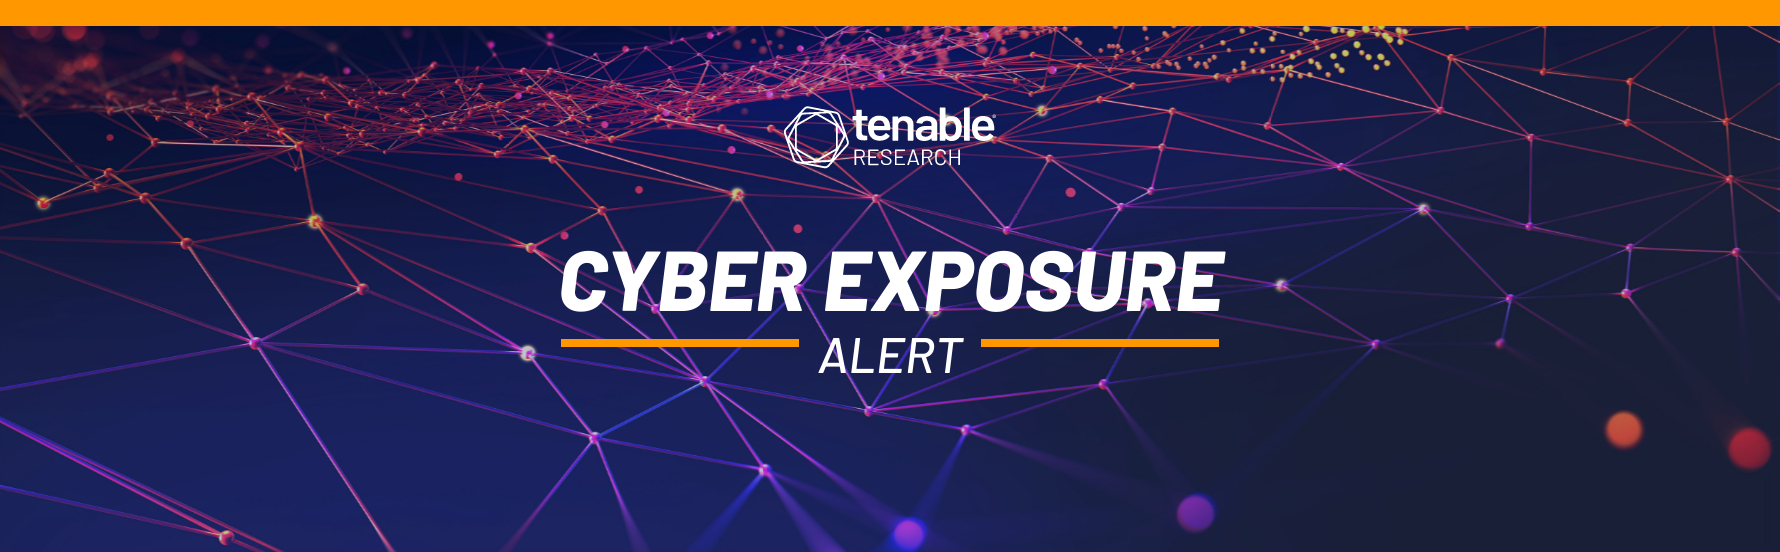 Tenable Cyber Exposure Alert for CVE-2022-37958, a critical remote code execution vulnerability in Microsoft SPNEGO NEGOEX.